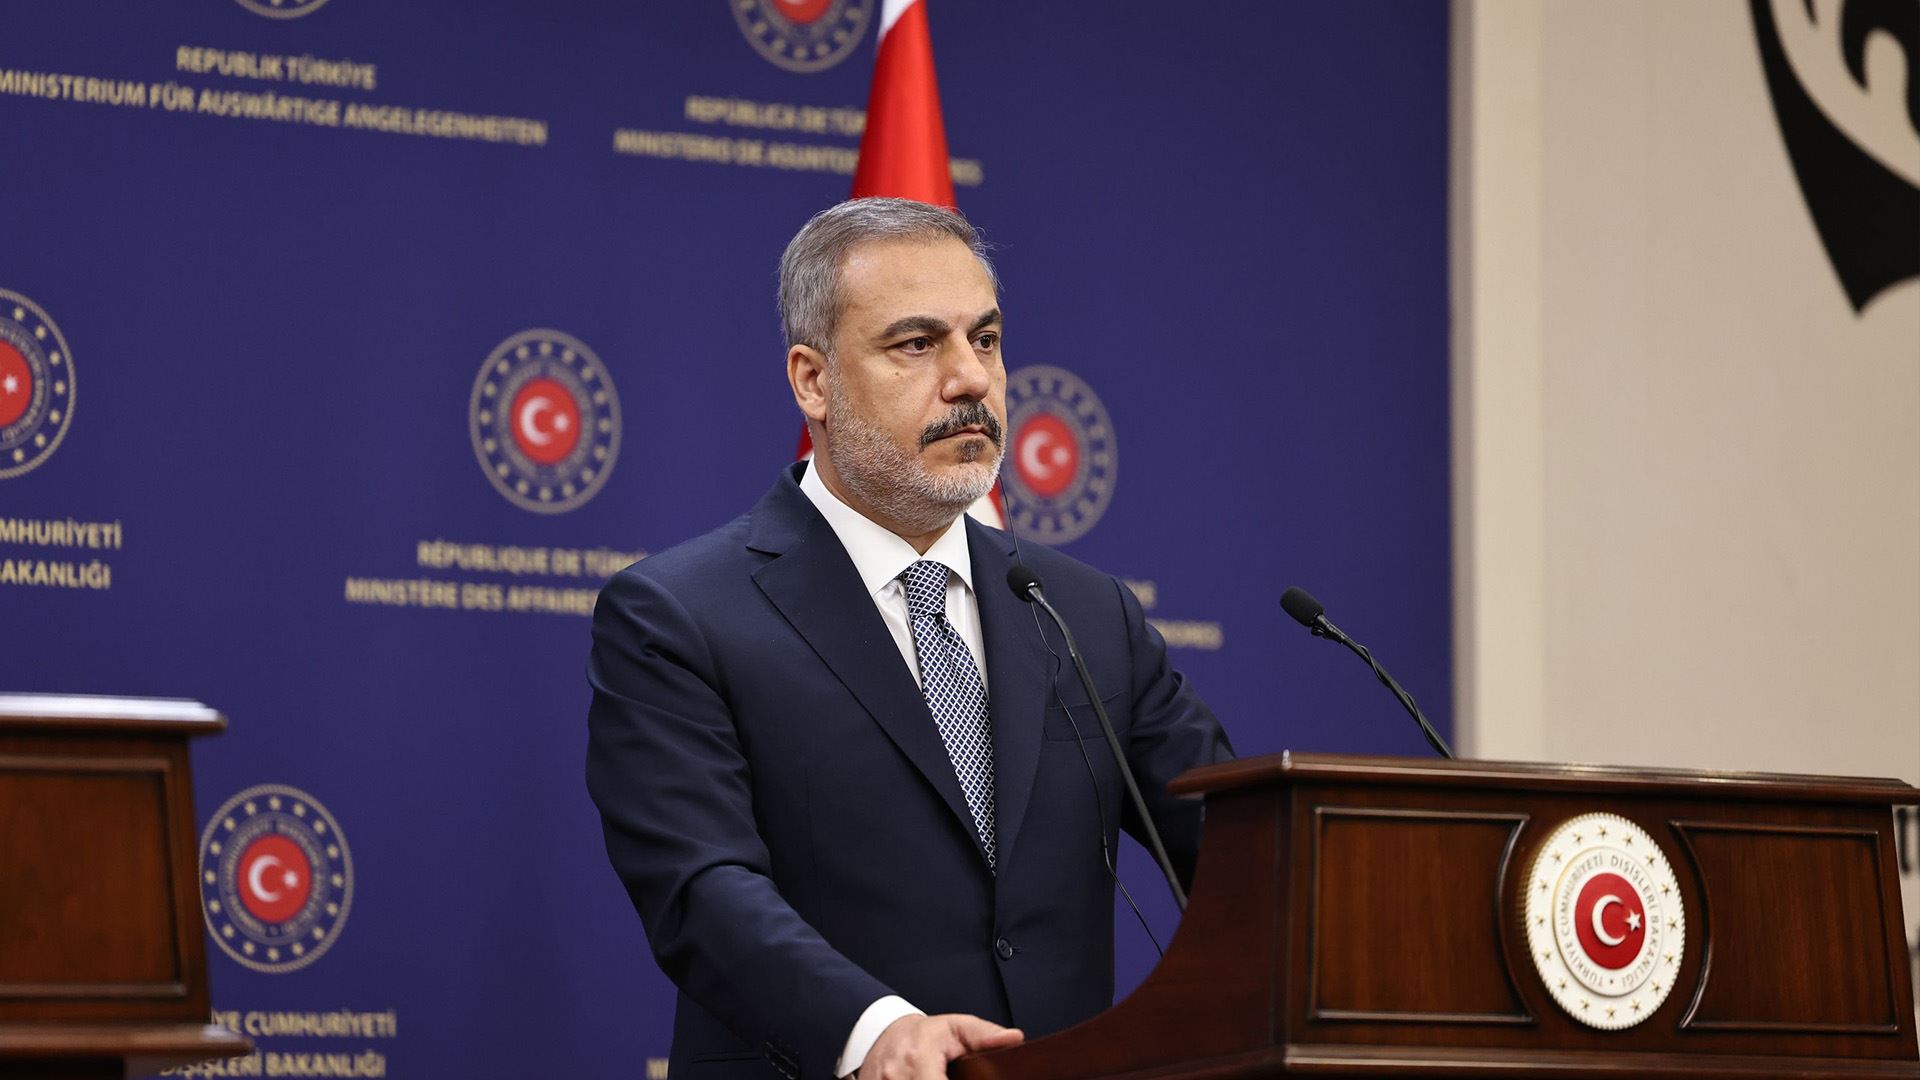 Ankara aims for swift implementation of vital development road with Iraq